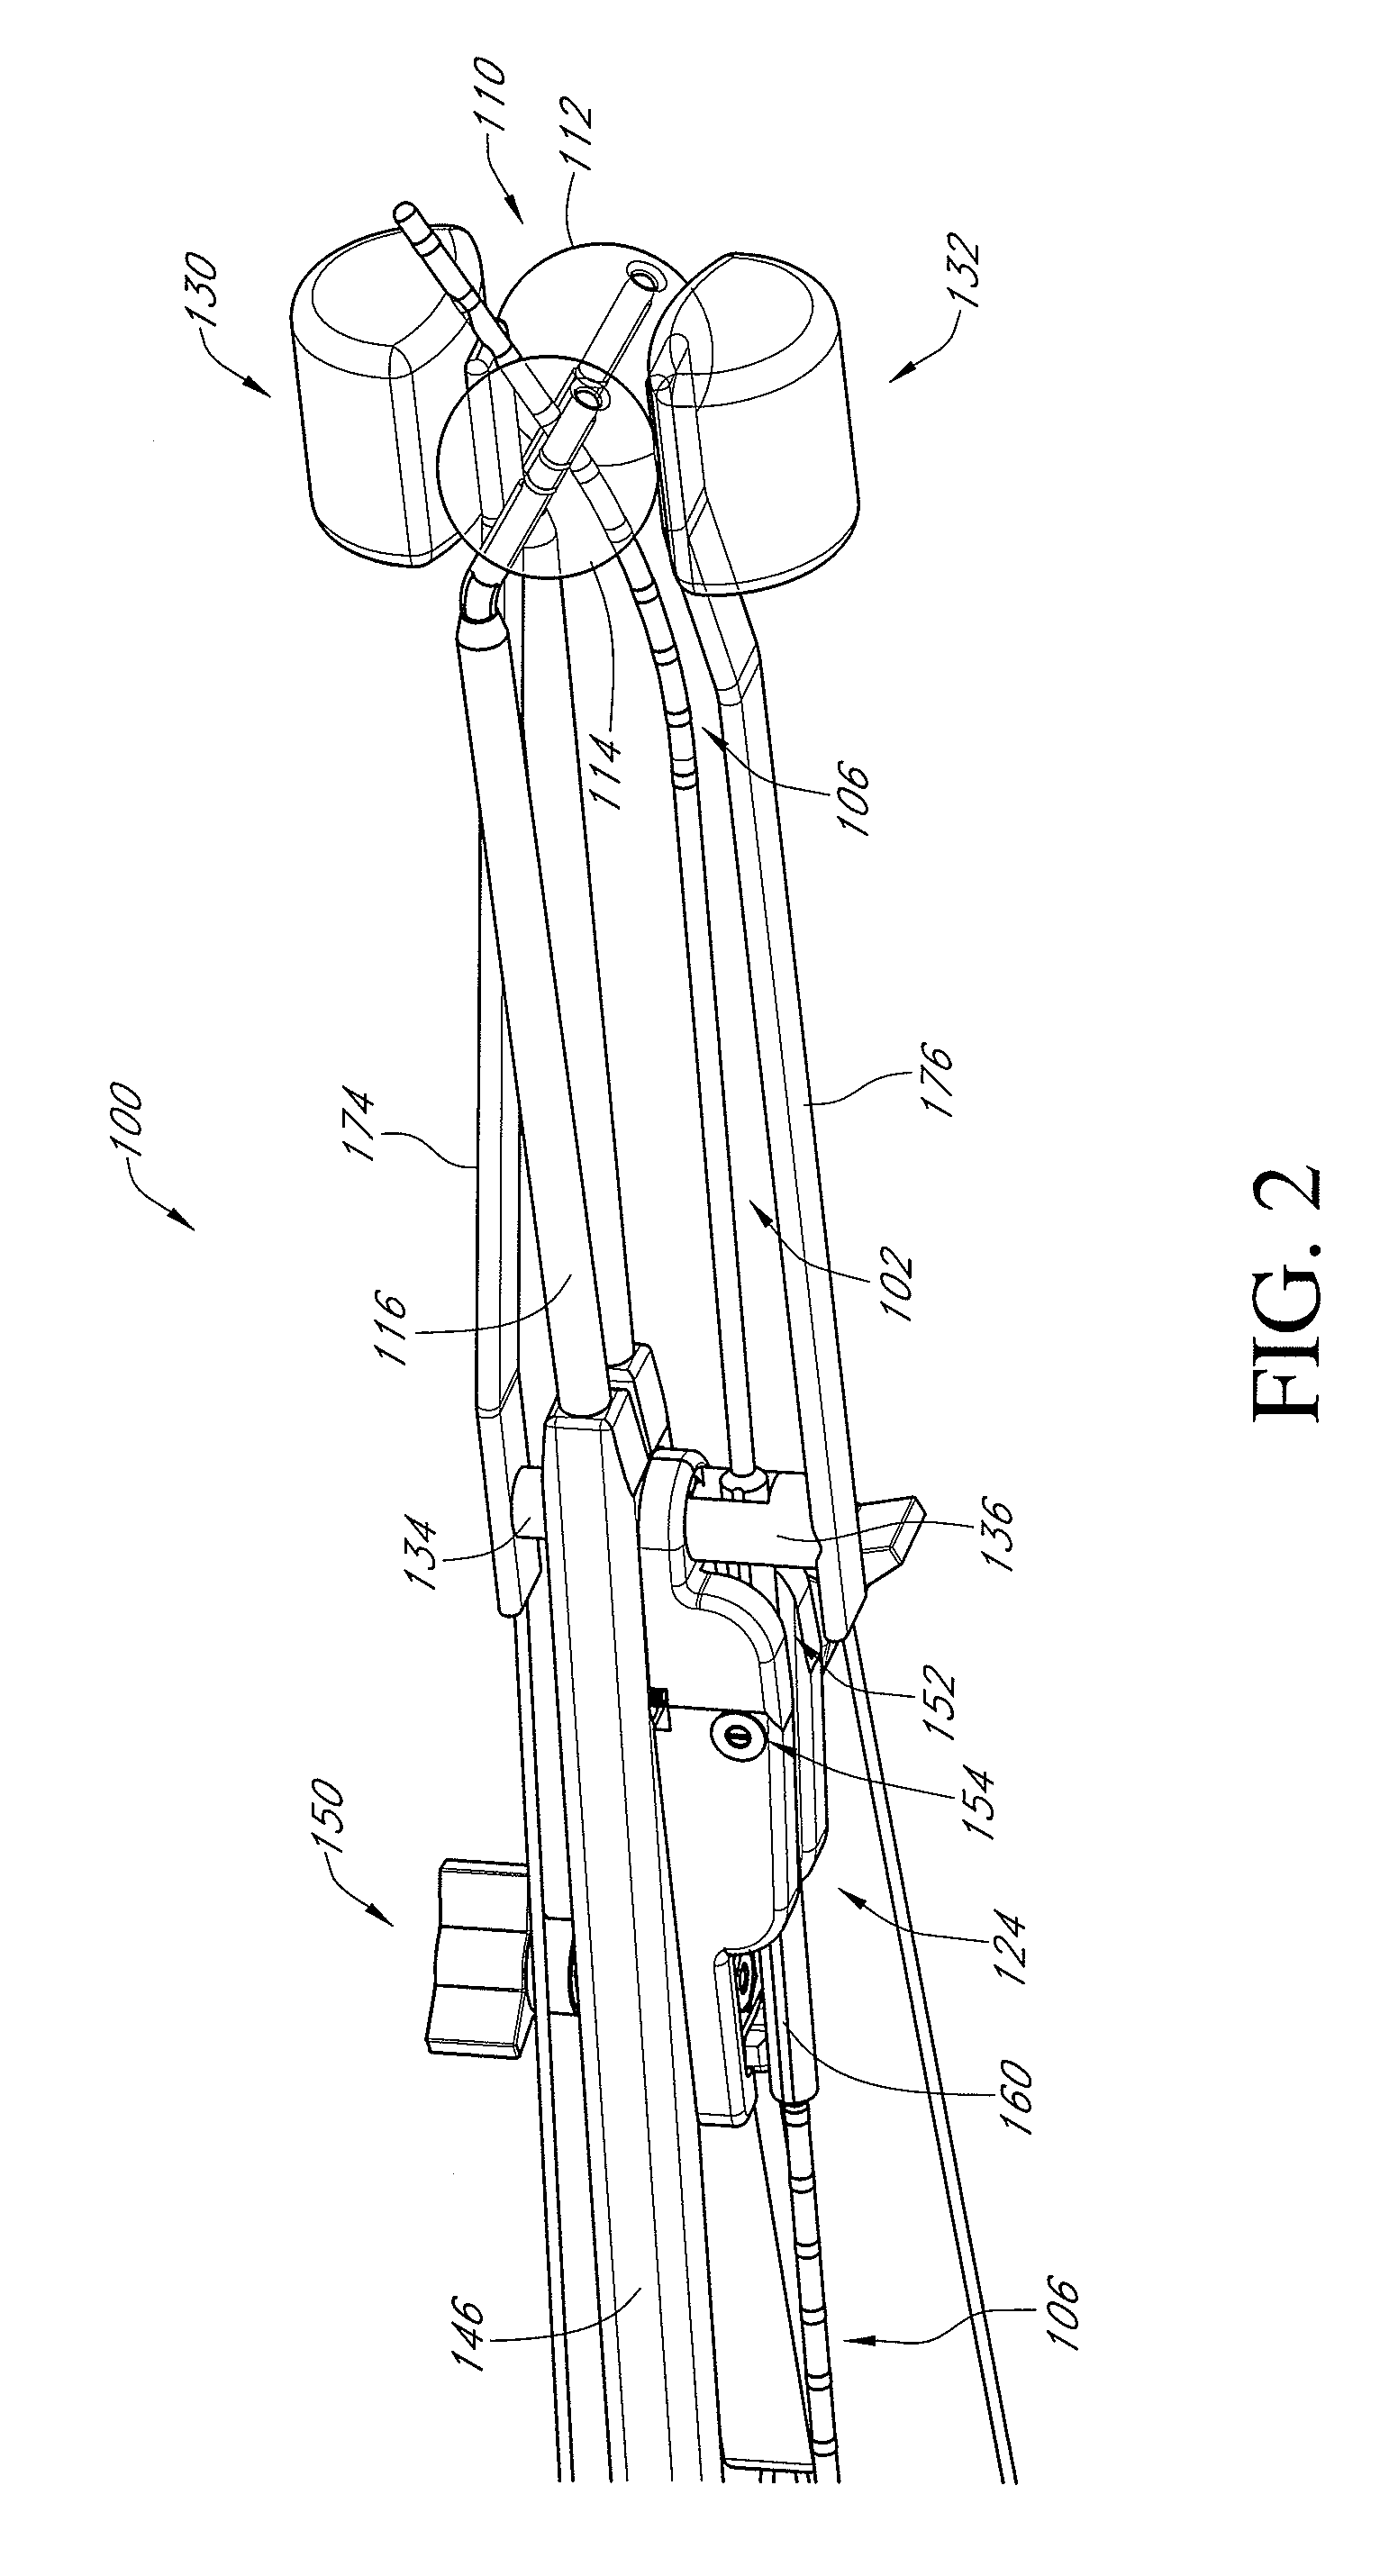 Systems and methods for treating cancer using brachytherapy